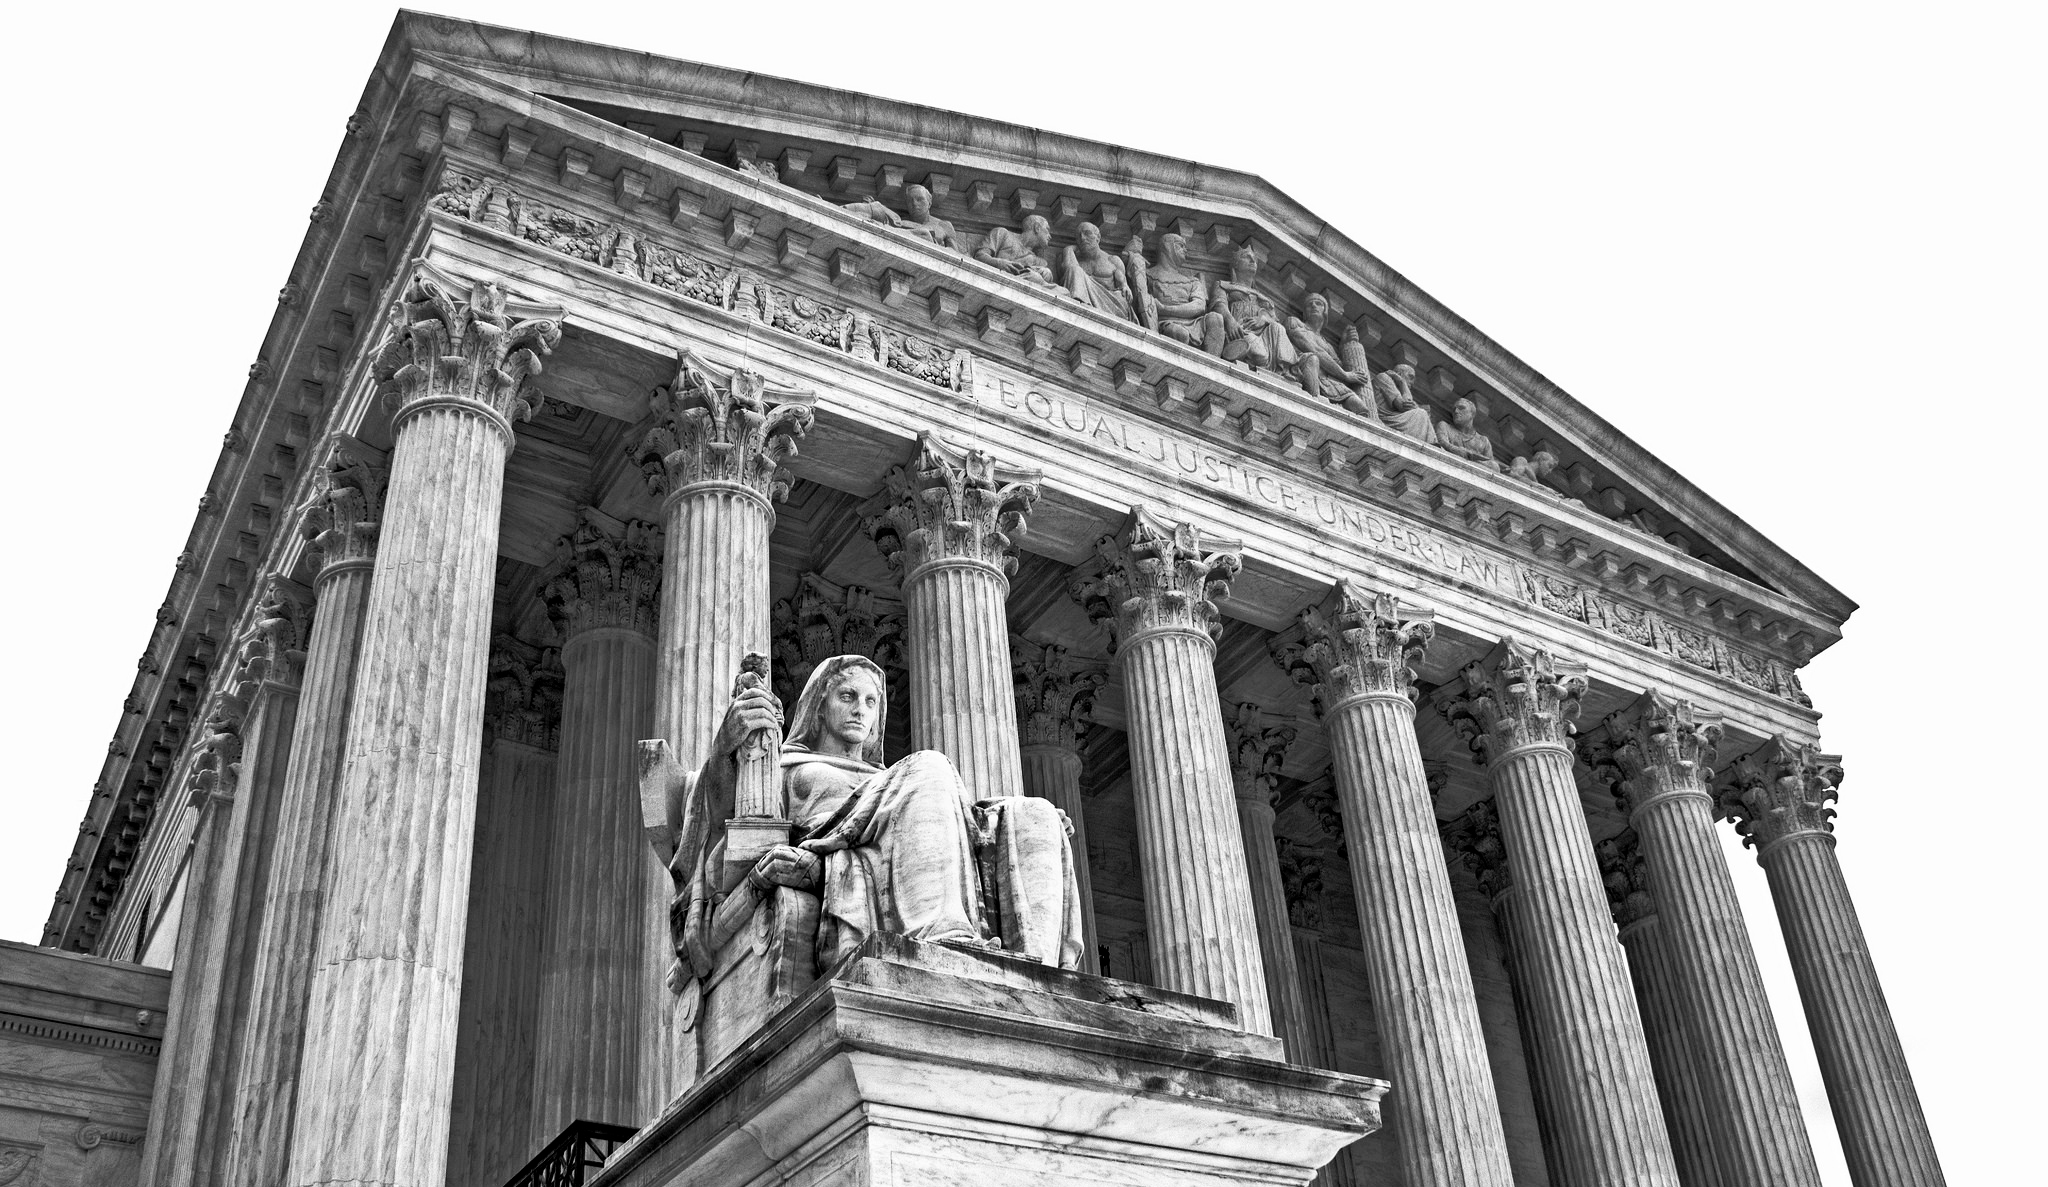 What Does Justice Scalia’s Death Mean for United States v. Texas, the DAPA/DACA Case?